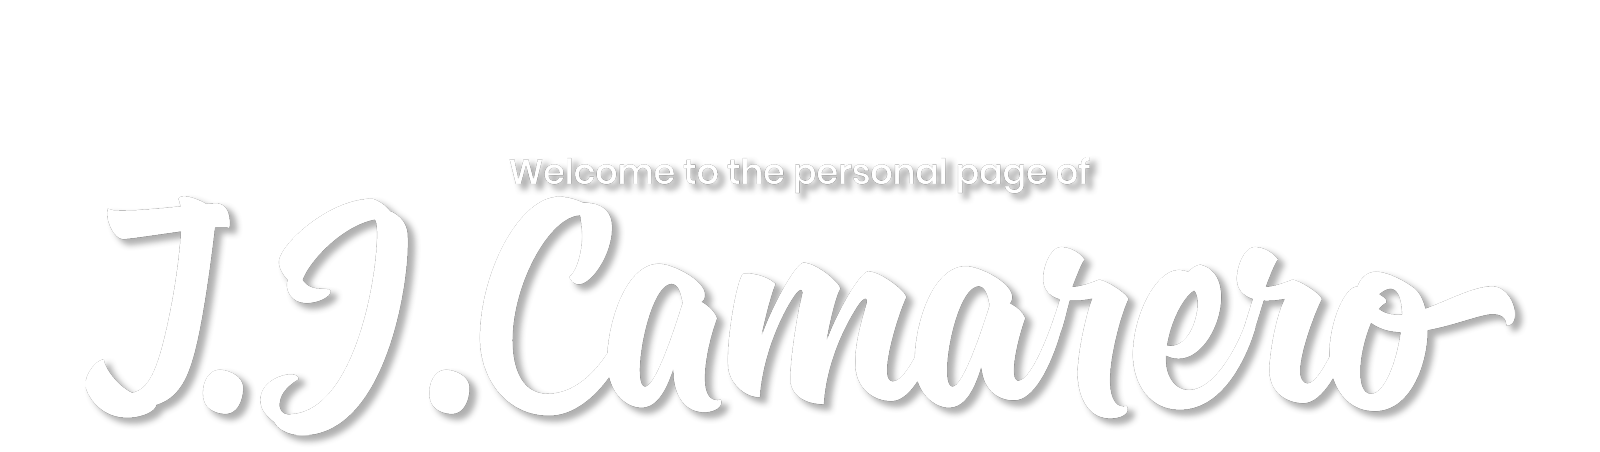 Welcome to the personal page of